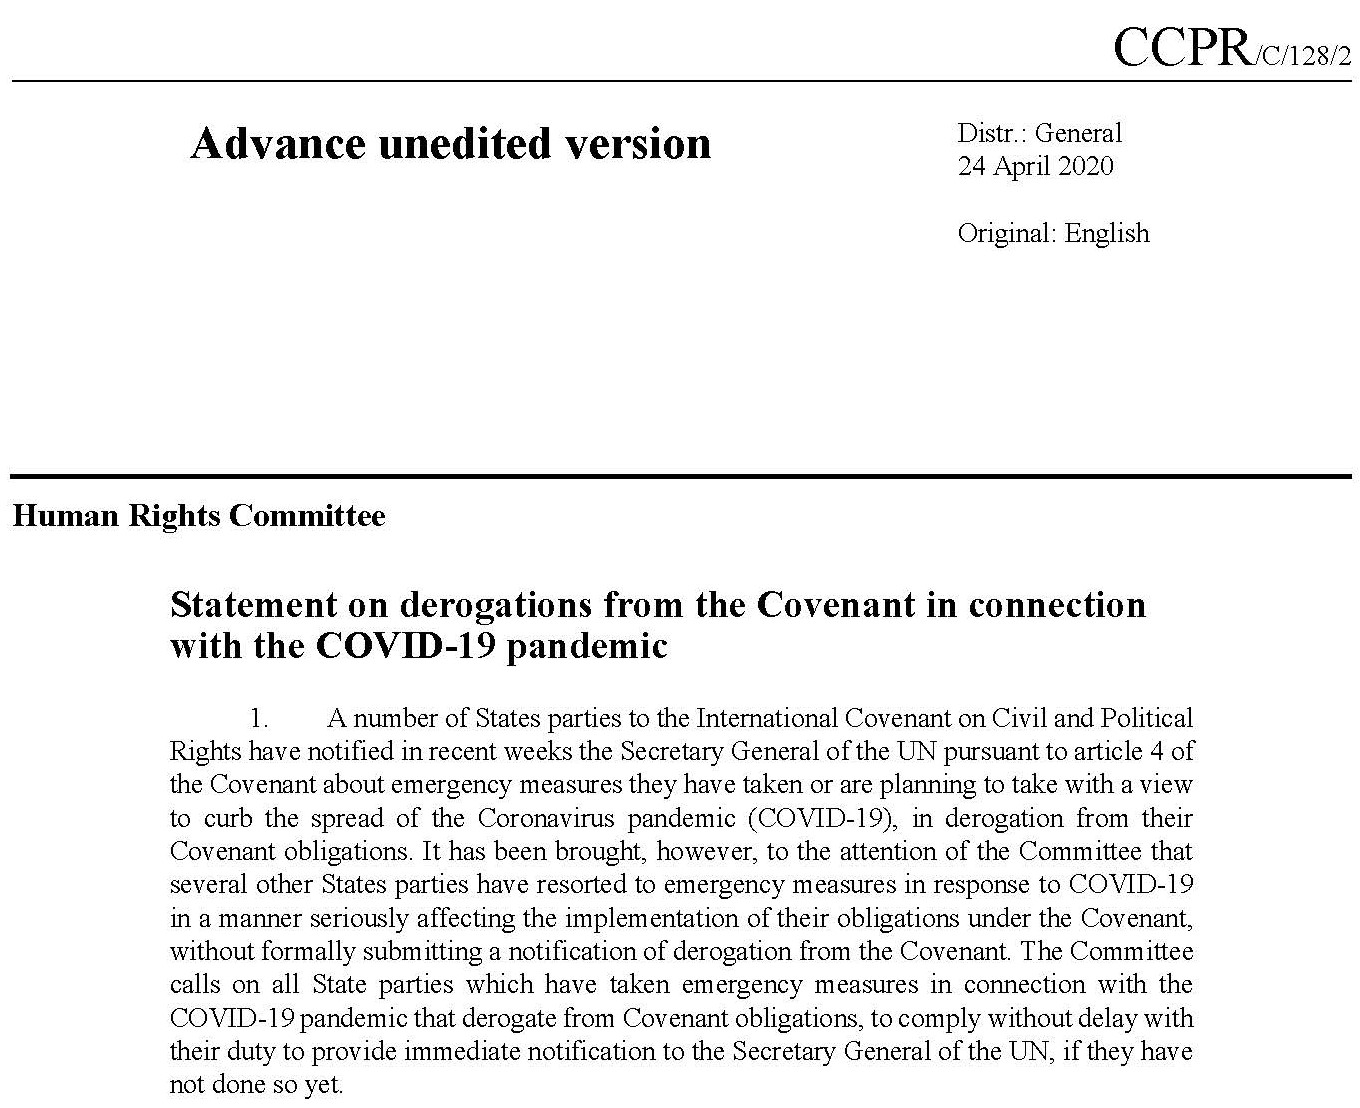 Statement on derogations from the Covenant in connection with the COVID-19 pandemic adopted by the Human Rights Committee 